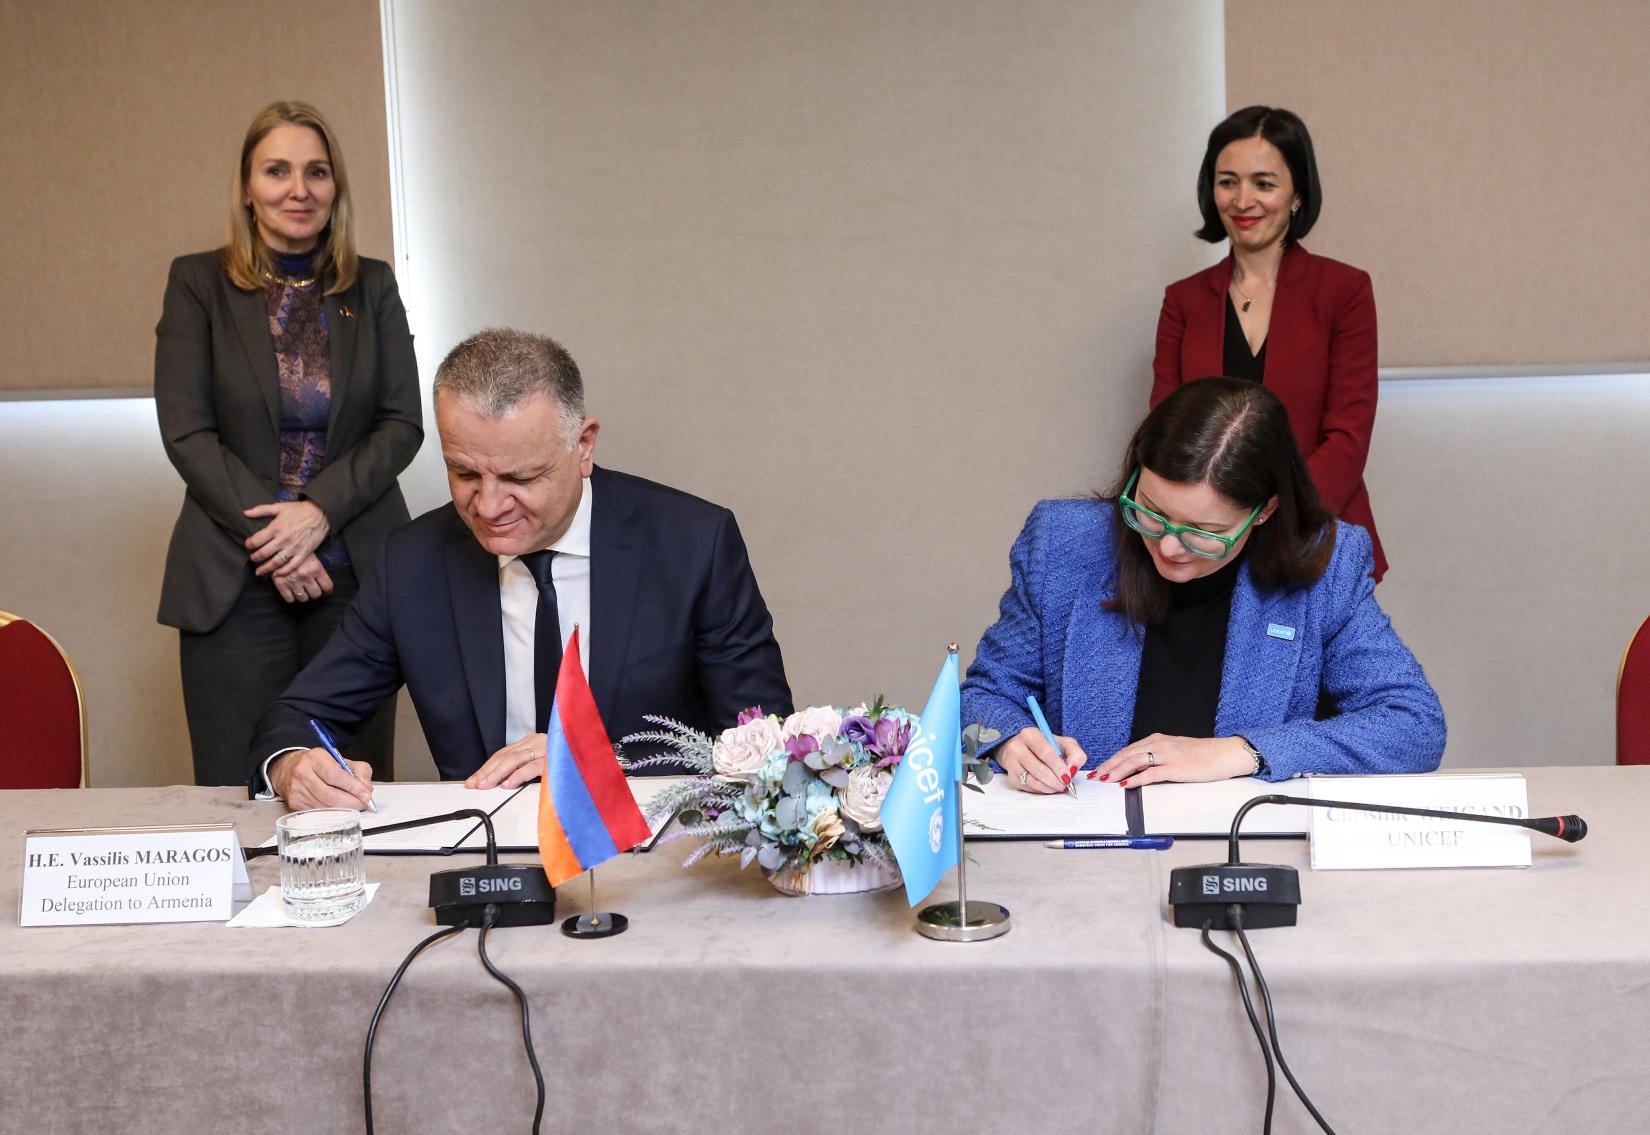 EU and UNICEF officials signing an agreement.